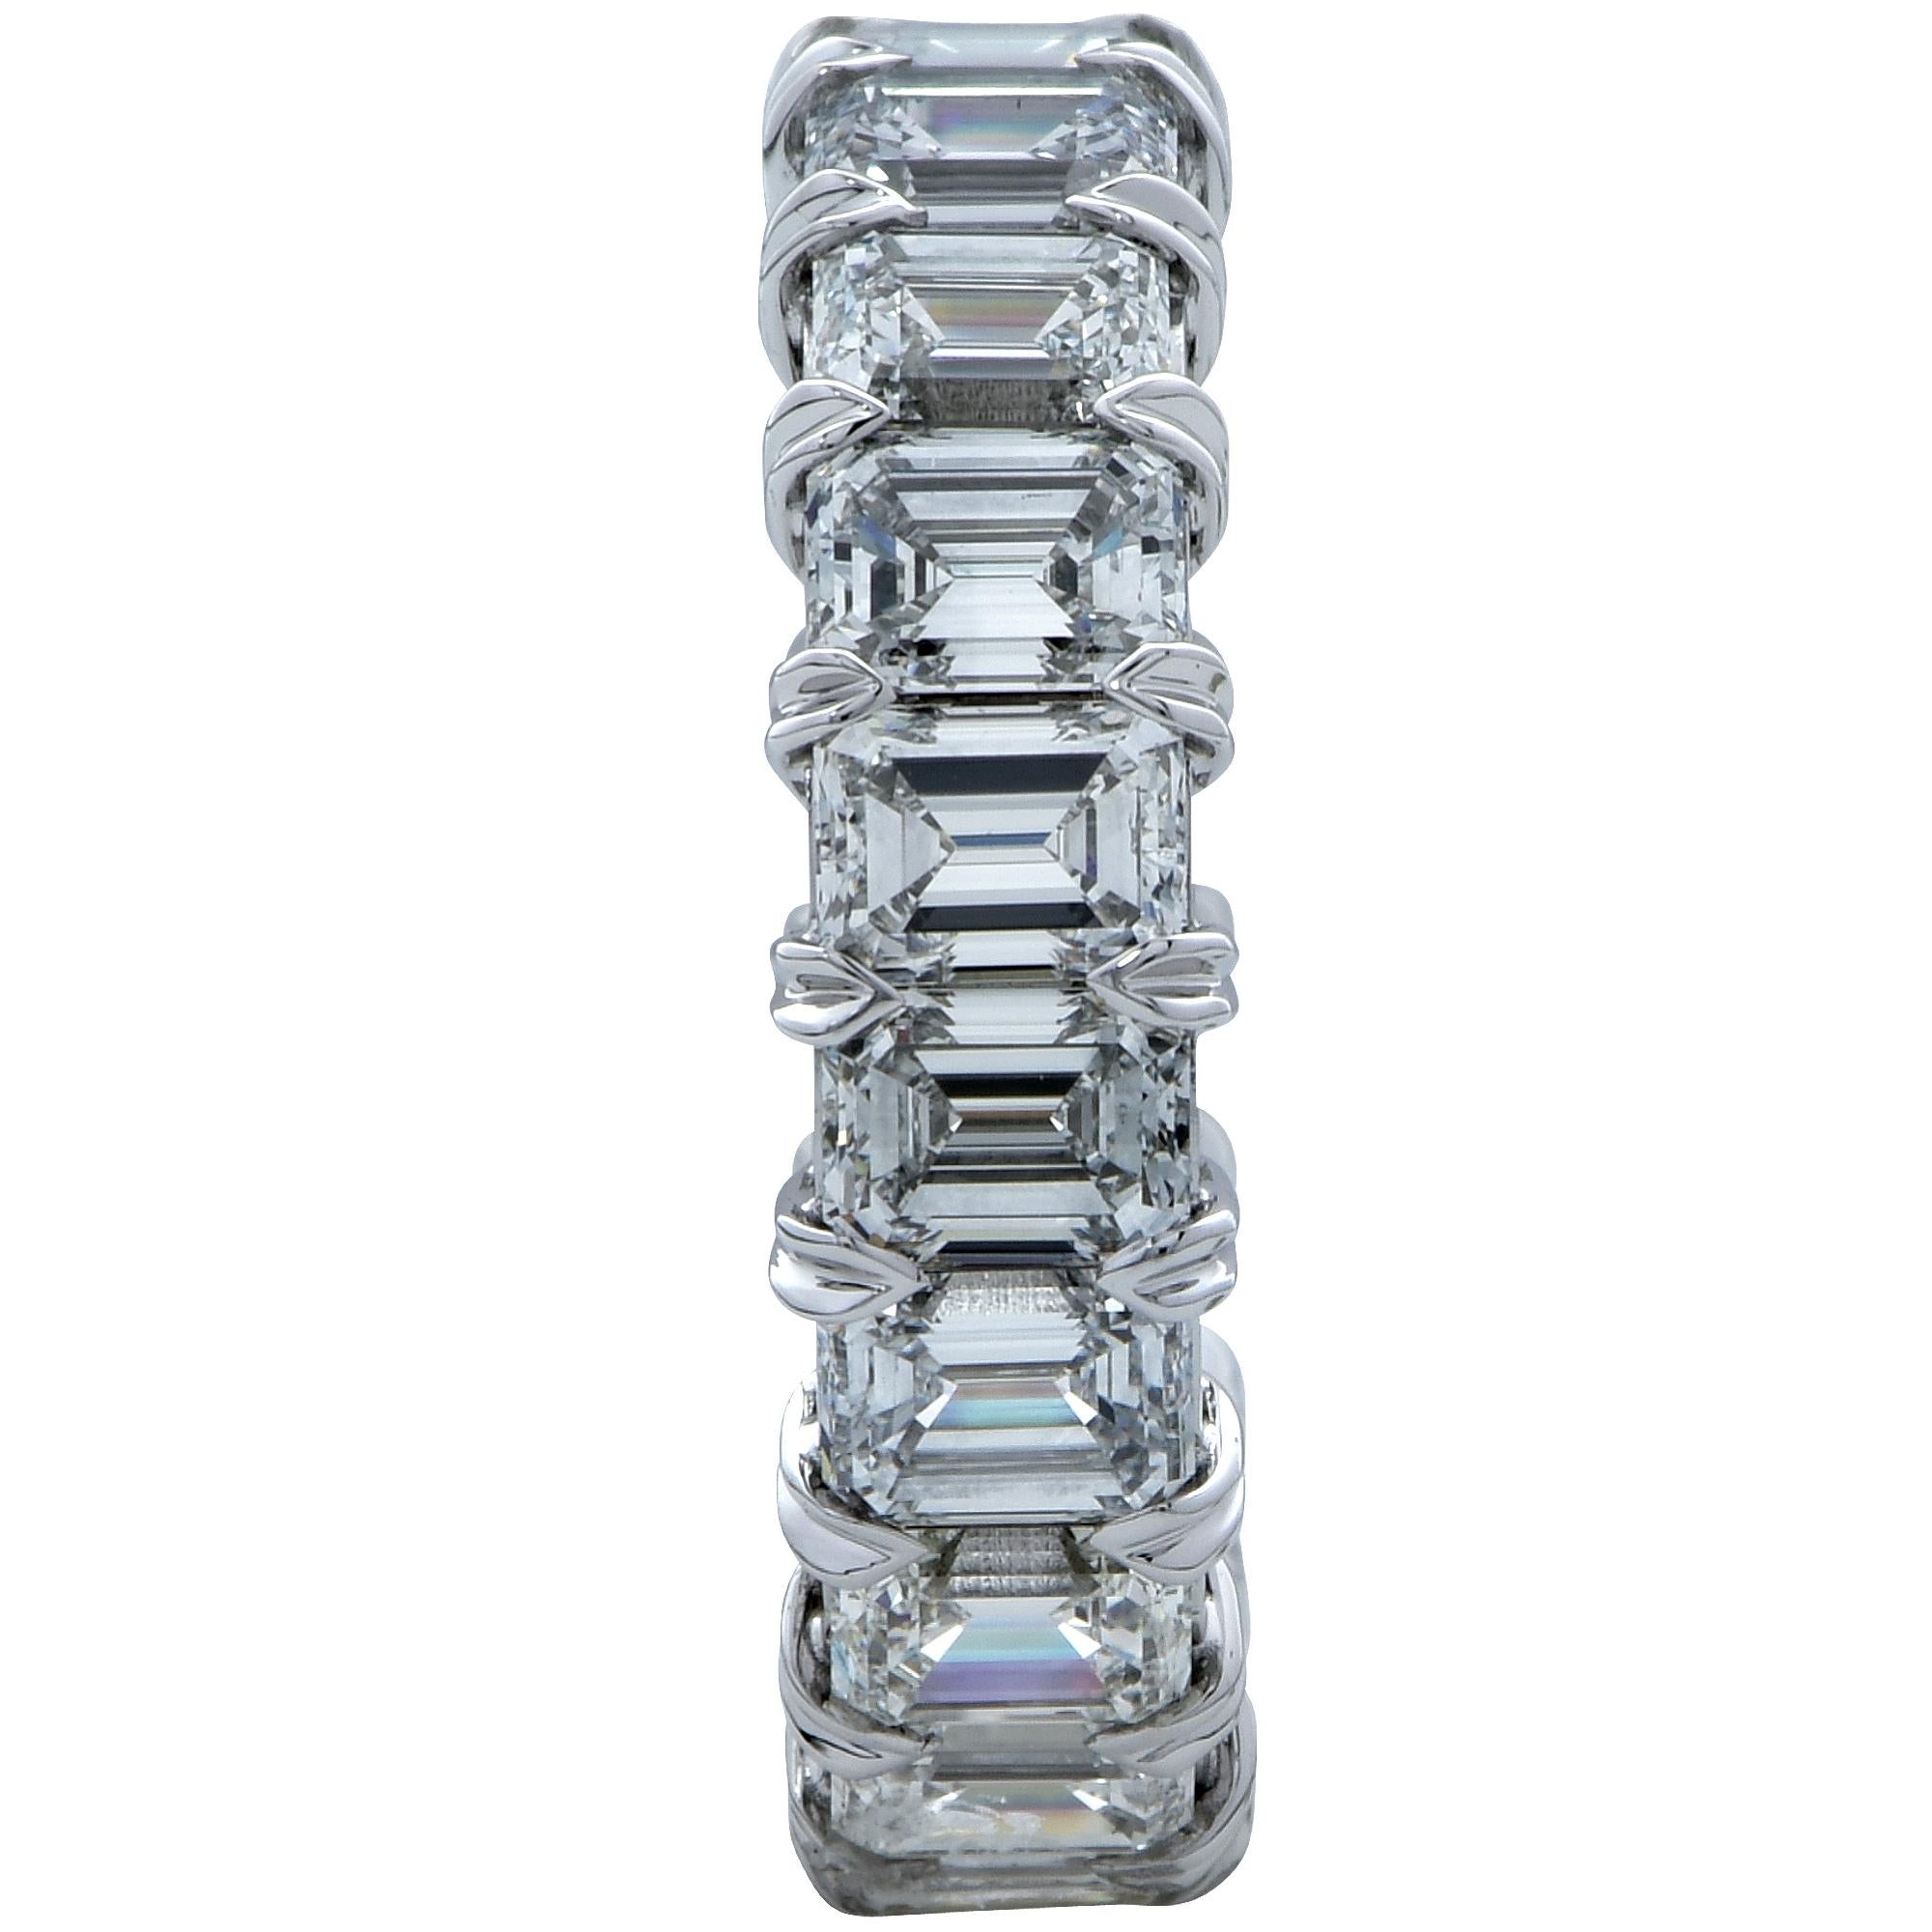 Exquisite Vivid Diamonds eternity band crafted in Platinum, showcasing 20 stunning emerald cut diamonds weighing 6.43 carats total, D- F color, VVS clarity. Each diamond is carefully selected, perfectly matched and set in a seamless sea of eternity,